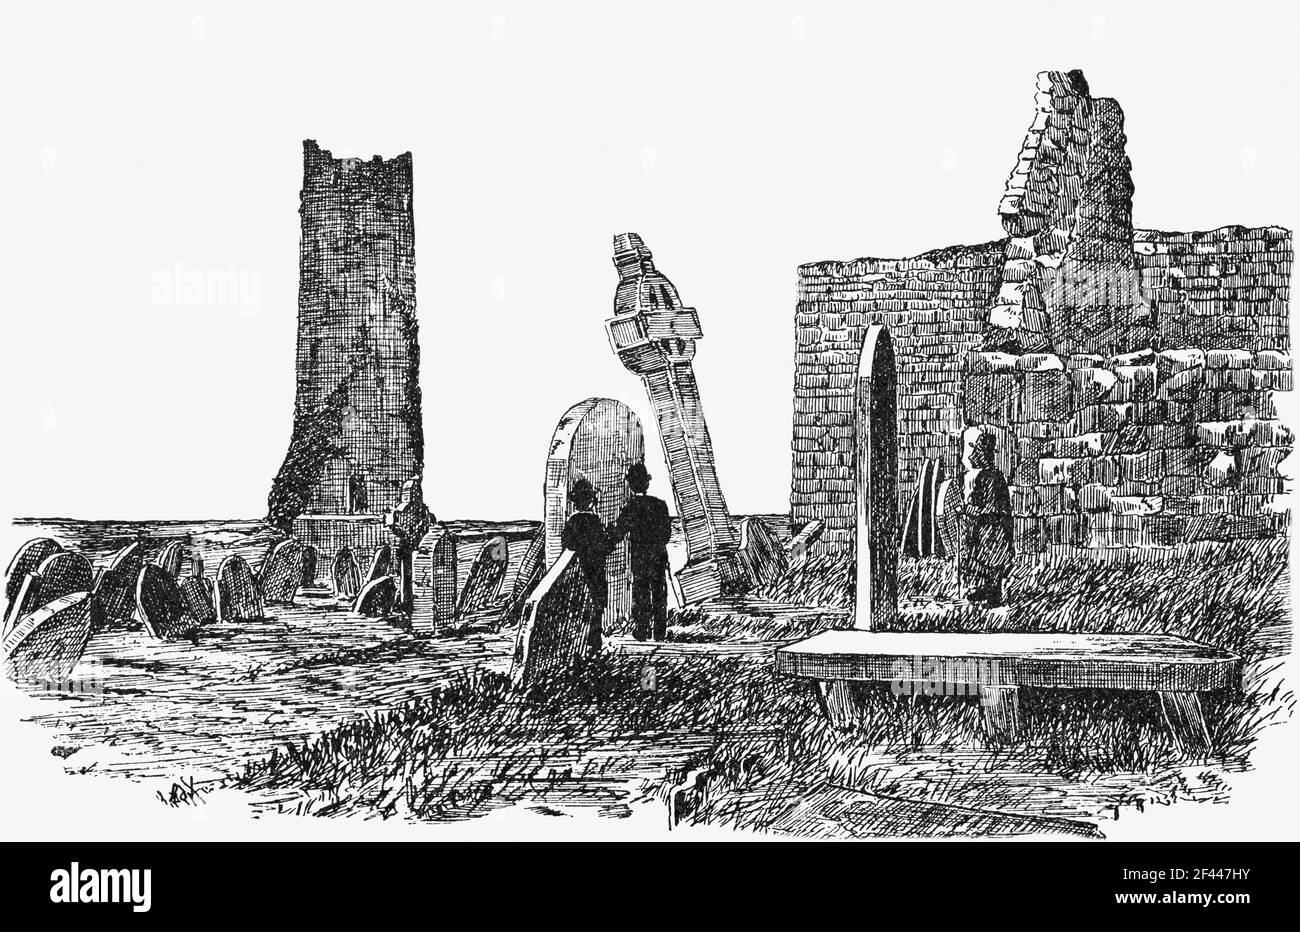 A 19th Century illustration of visitors to Clonmacnoise, a monastery in County Offaly, Ireland founded on the River Shannon in 544 by St. Ciarán. It became a centre of culture growth until Ireland's move from a monastic framework to a diocesan one in the twelfth century diminished the site's religious standing. In 1552 the English garrison at Athlone destroyed and looted Clonmacnoise for the final time, leaving it in ruins. Stock Photo